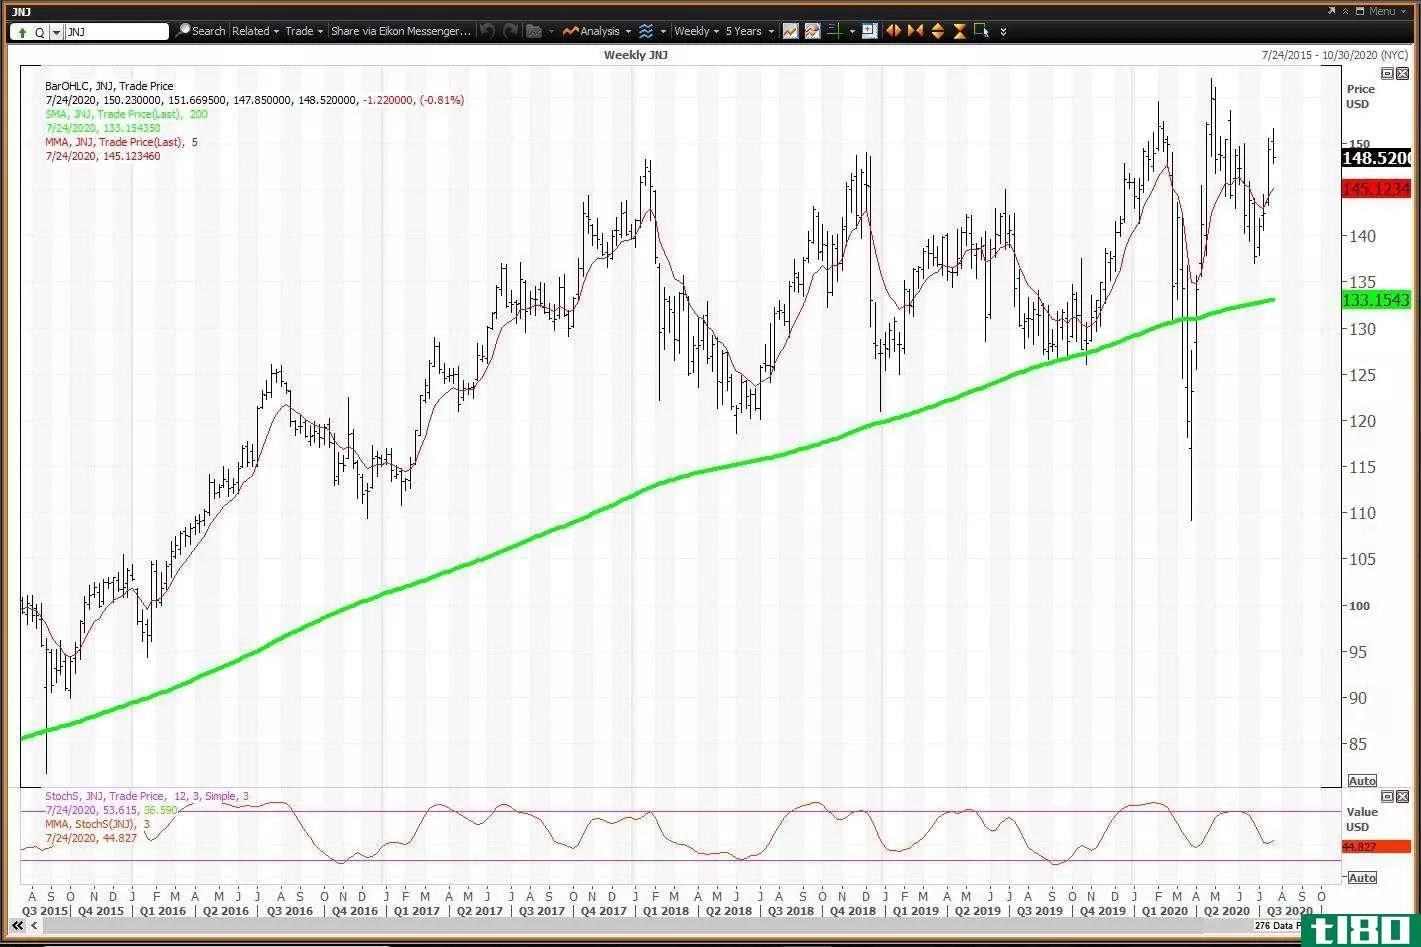 Weekly chart showing the share price performance of Johnson & Johnson (JNJ)